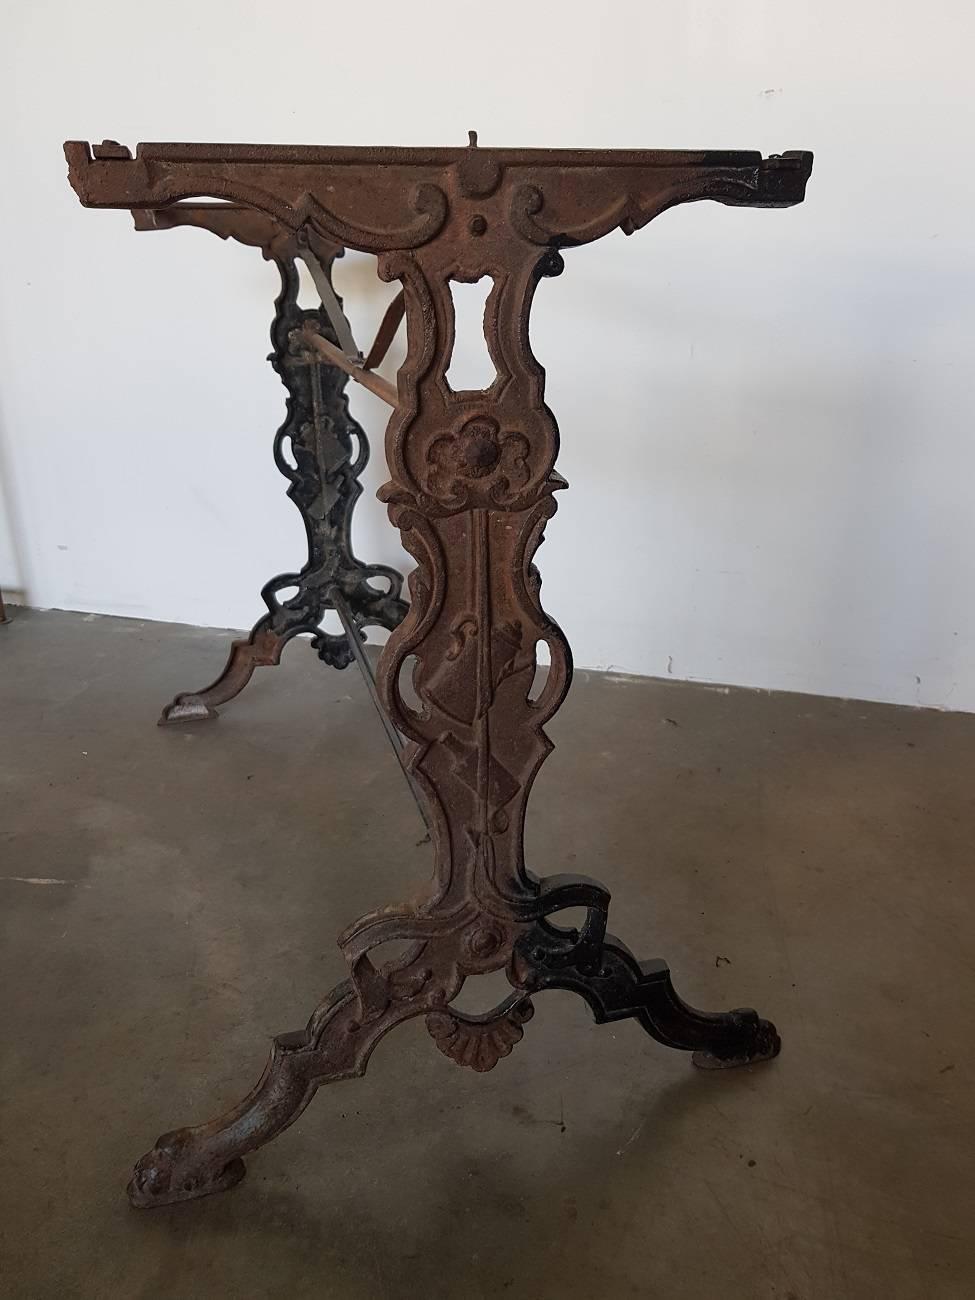 Late 19th century cast iron bistro table made in France, circa 1880, with relief decoration in the form of flowers, coffee can, bottle and a wine glass on both sides of legs.
It's a barn find in France, in a good, solid and original